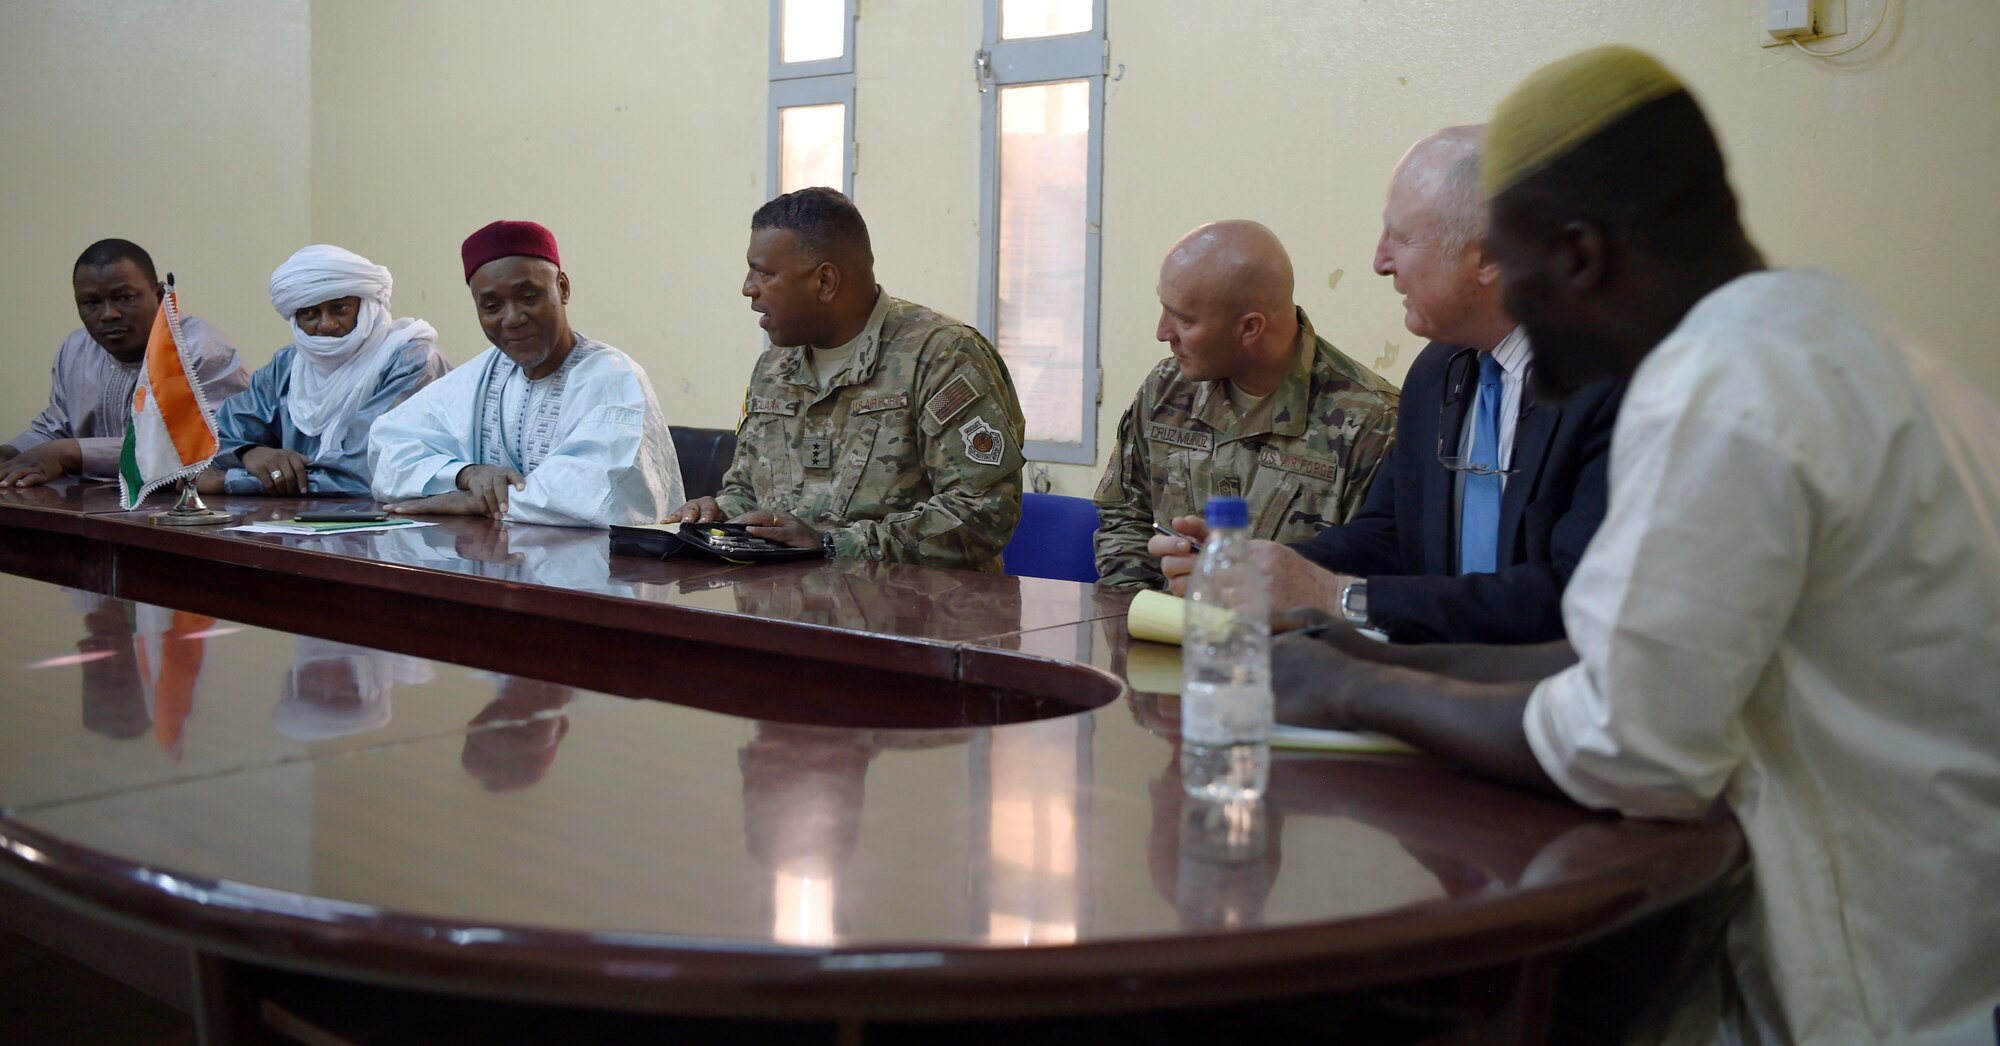 3 AF commander and command chief meet with Agadez leadership